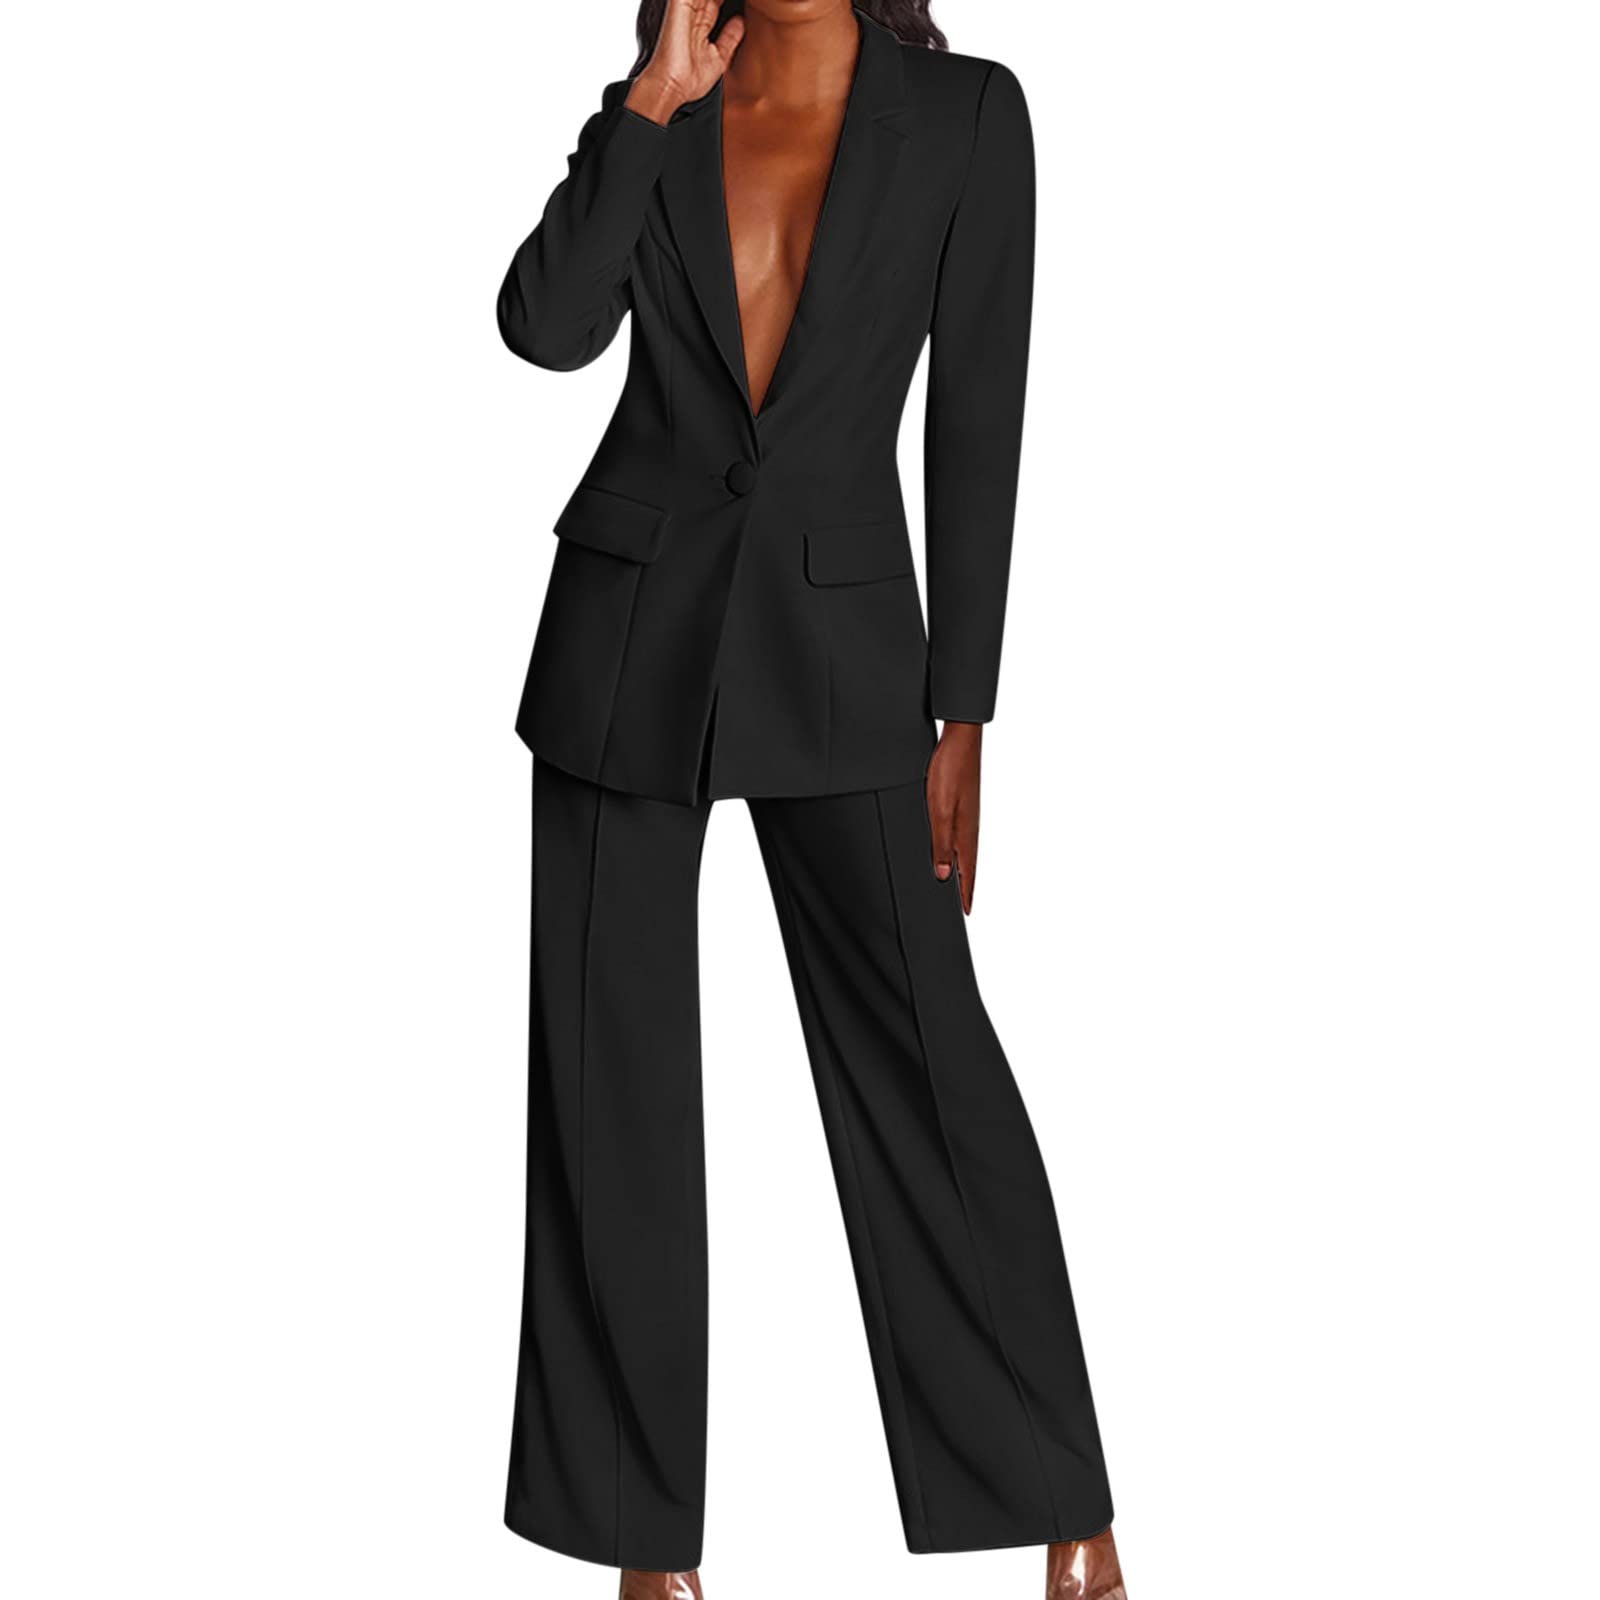 Women's Casual Solid Long Sleeve Suits Button Coat High Waist Long